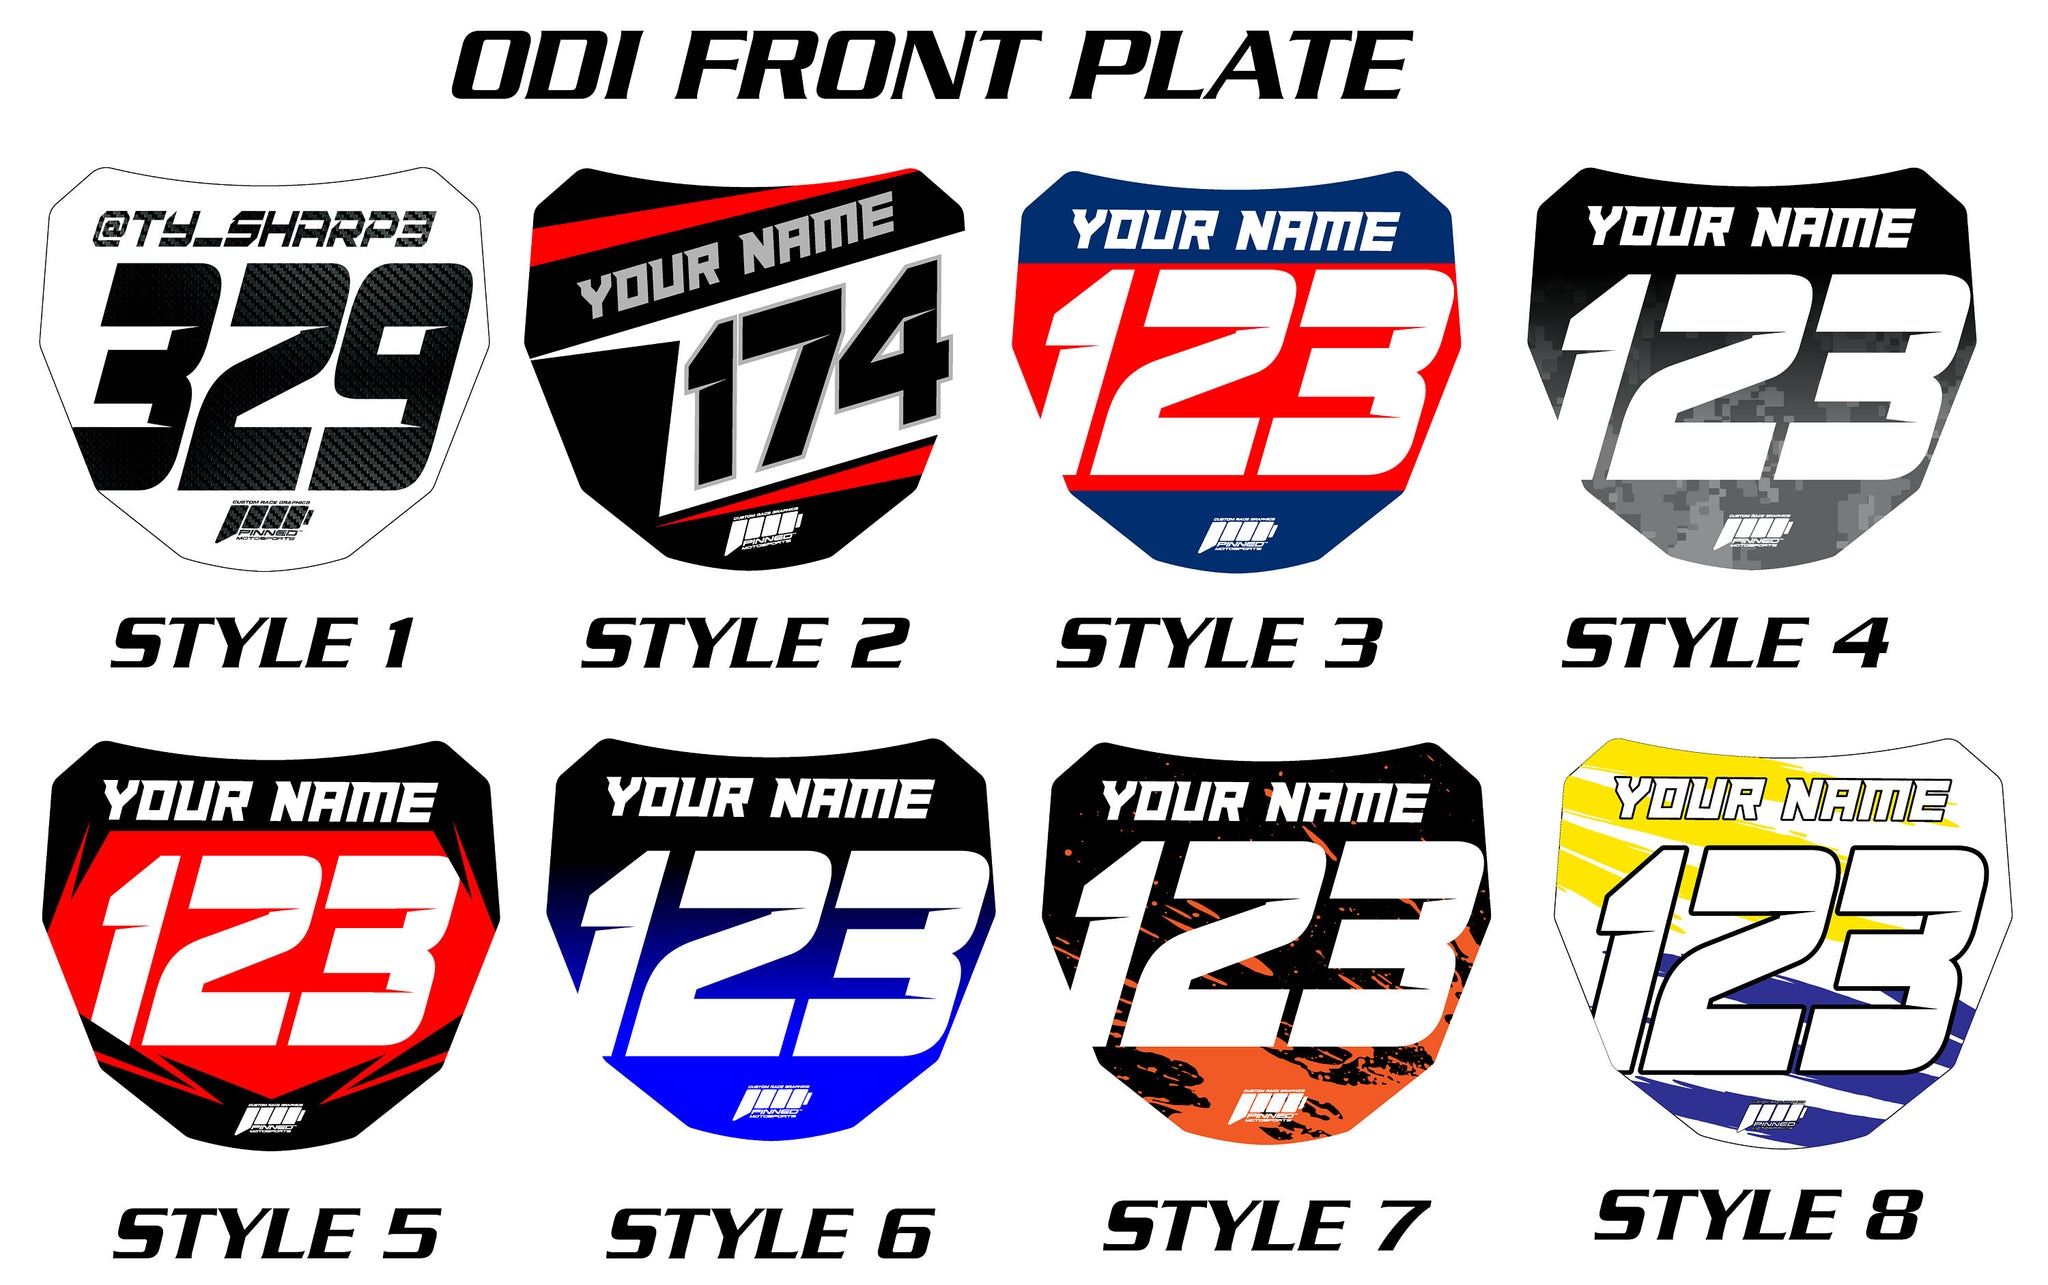 Chrome ODI Downhill Front Plate Decals, Chrome Name Number Plate decals, Fulll Color Chrome ODI MTB Plate Decals